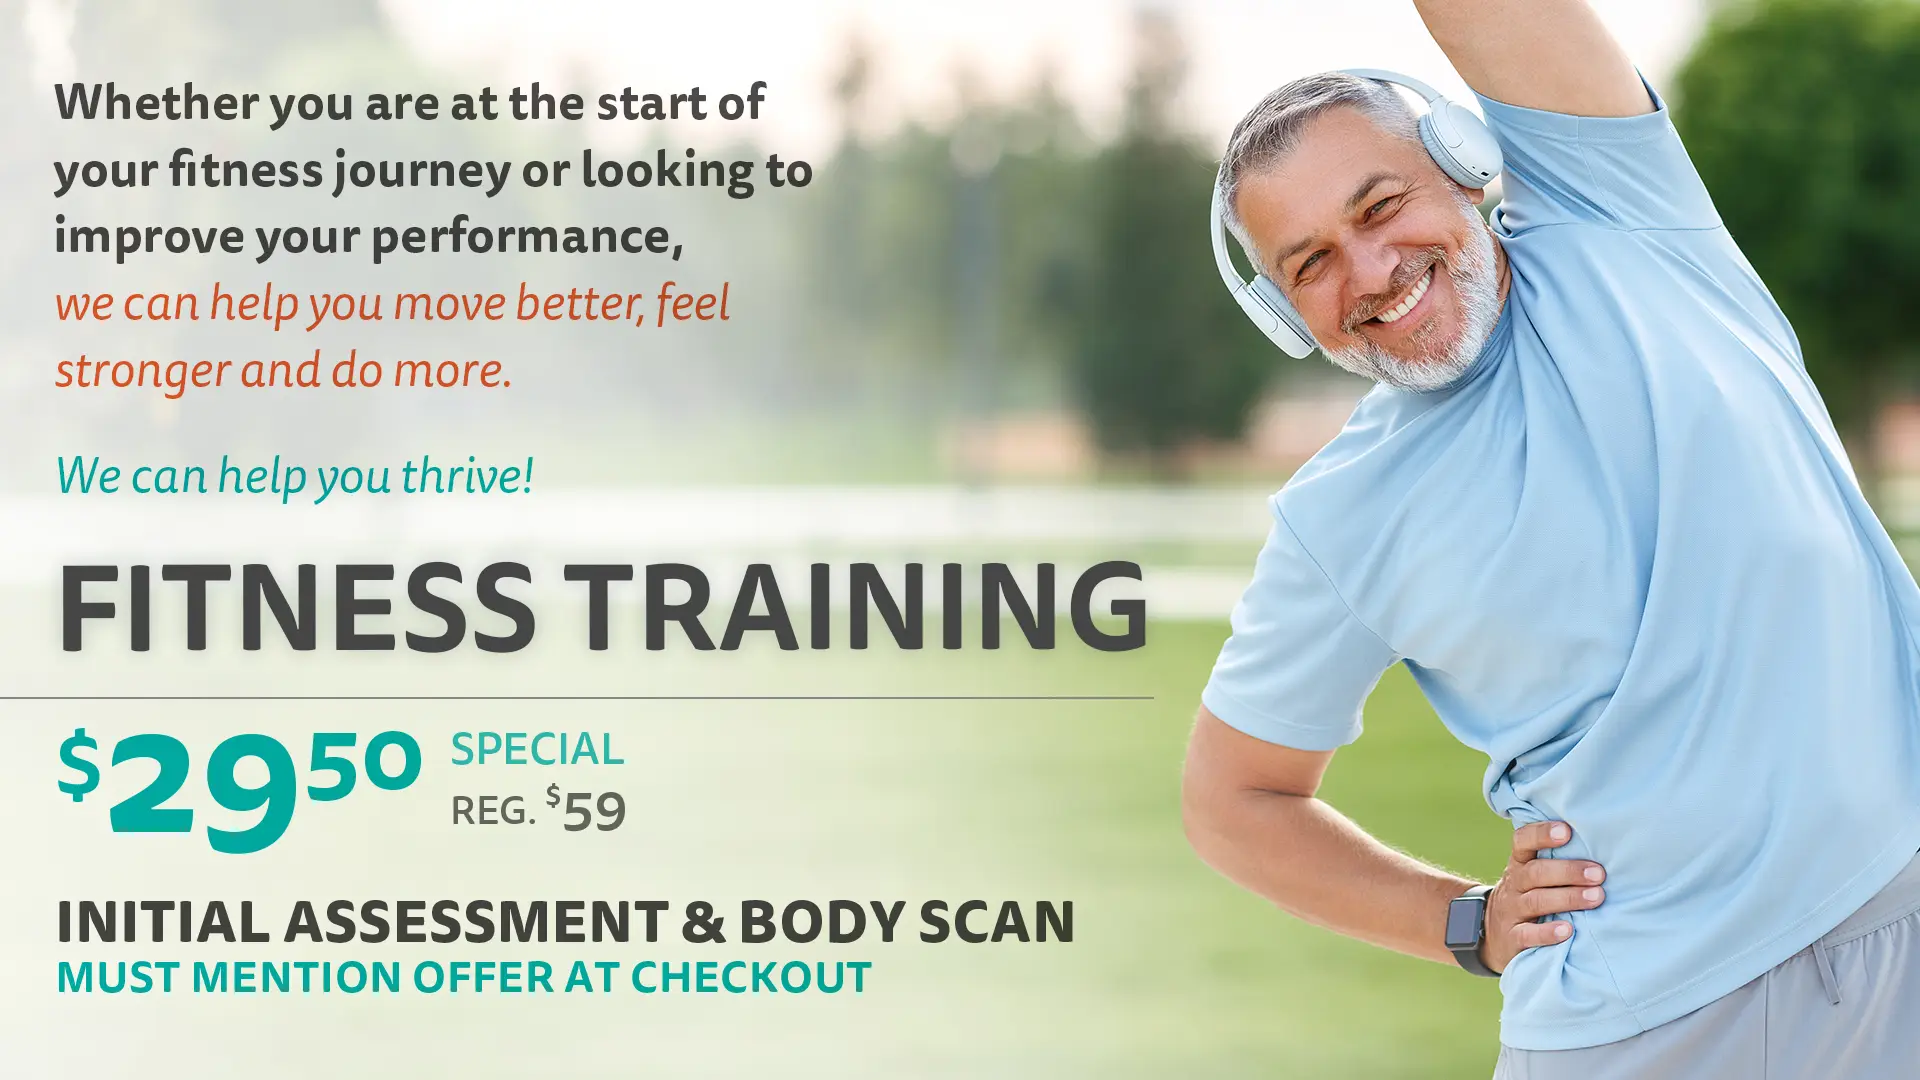 Fitness Training & Coaching Special Offer at Thrive Proactive Health